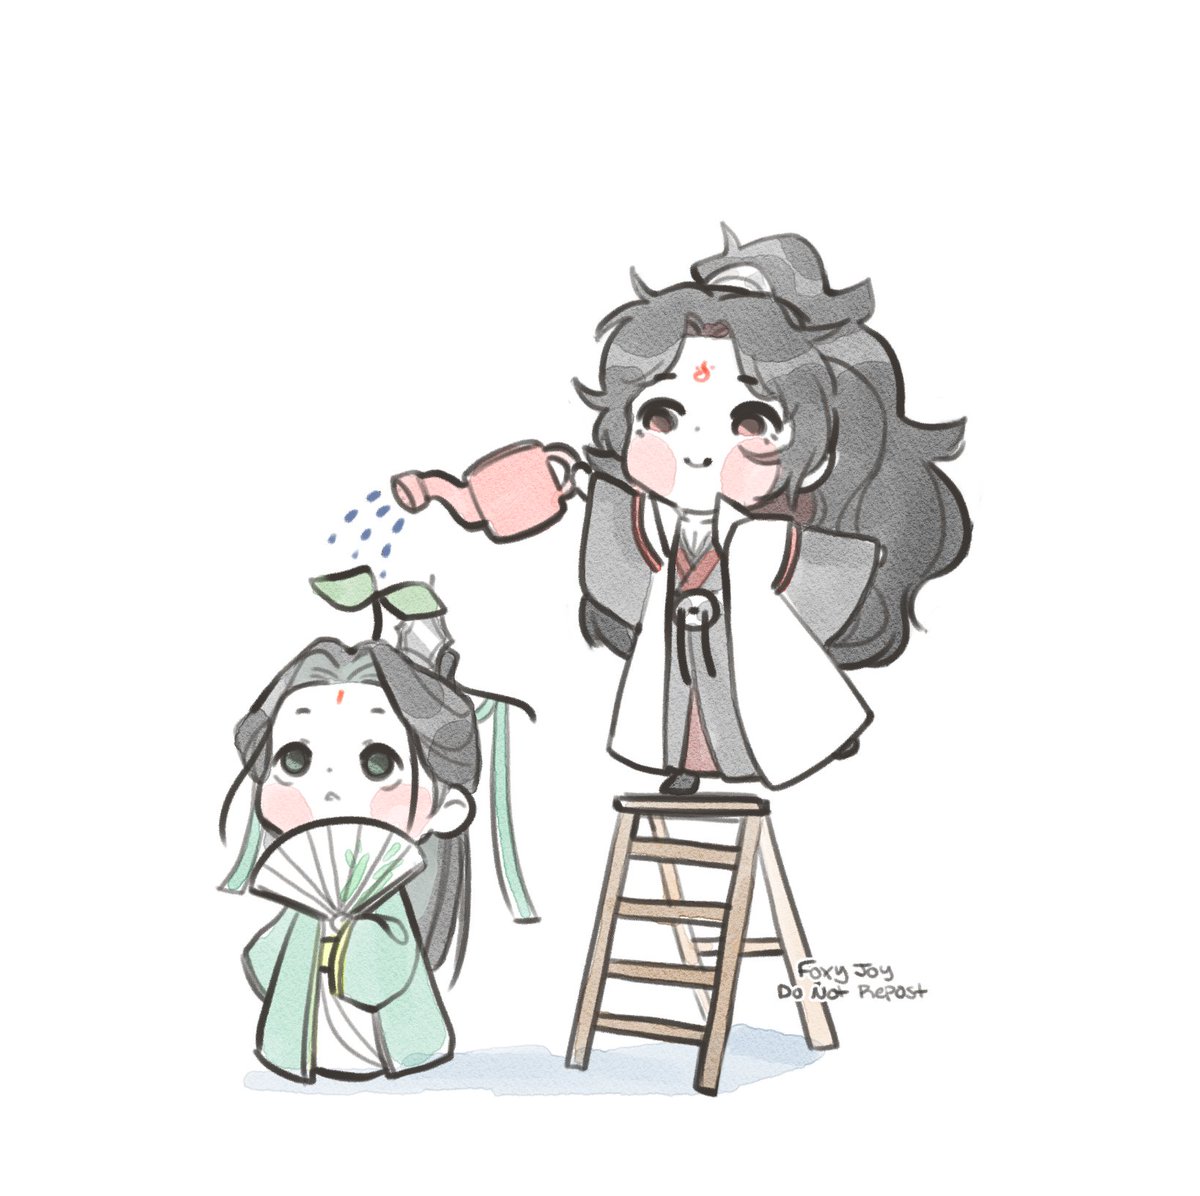 「don't forget to water your Shizun -#svss」|FoxyJoy 🦊🌸のイラスト